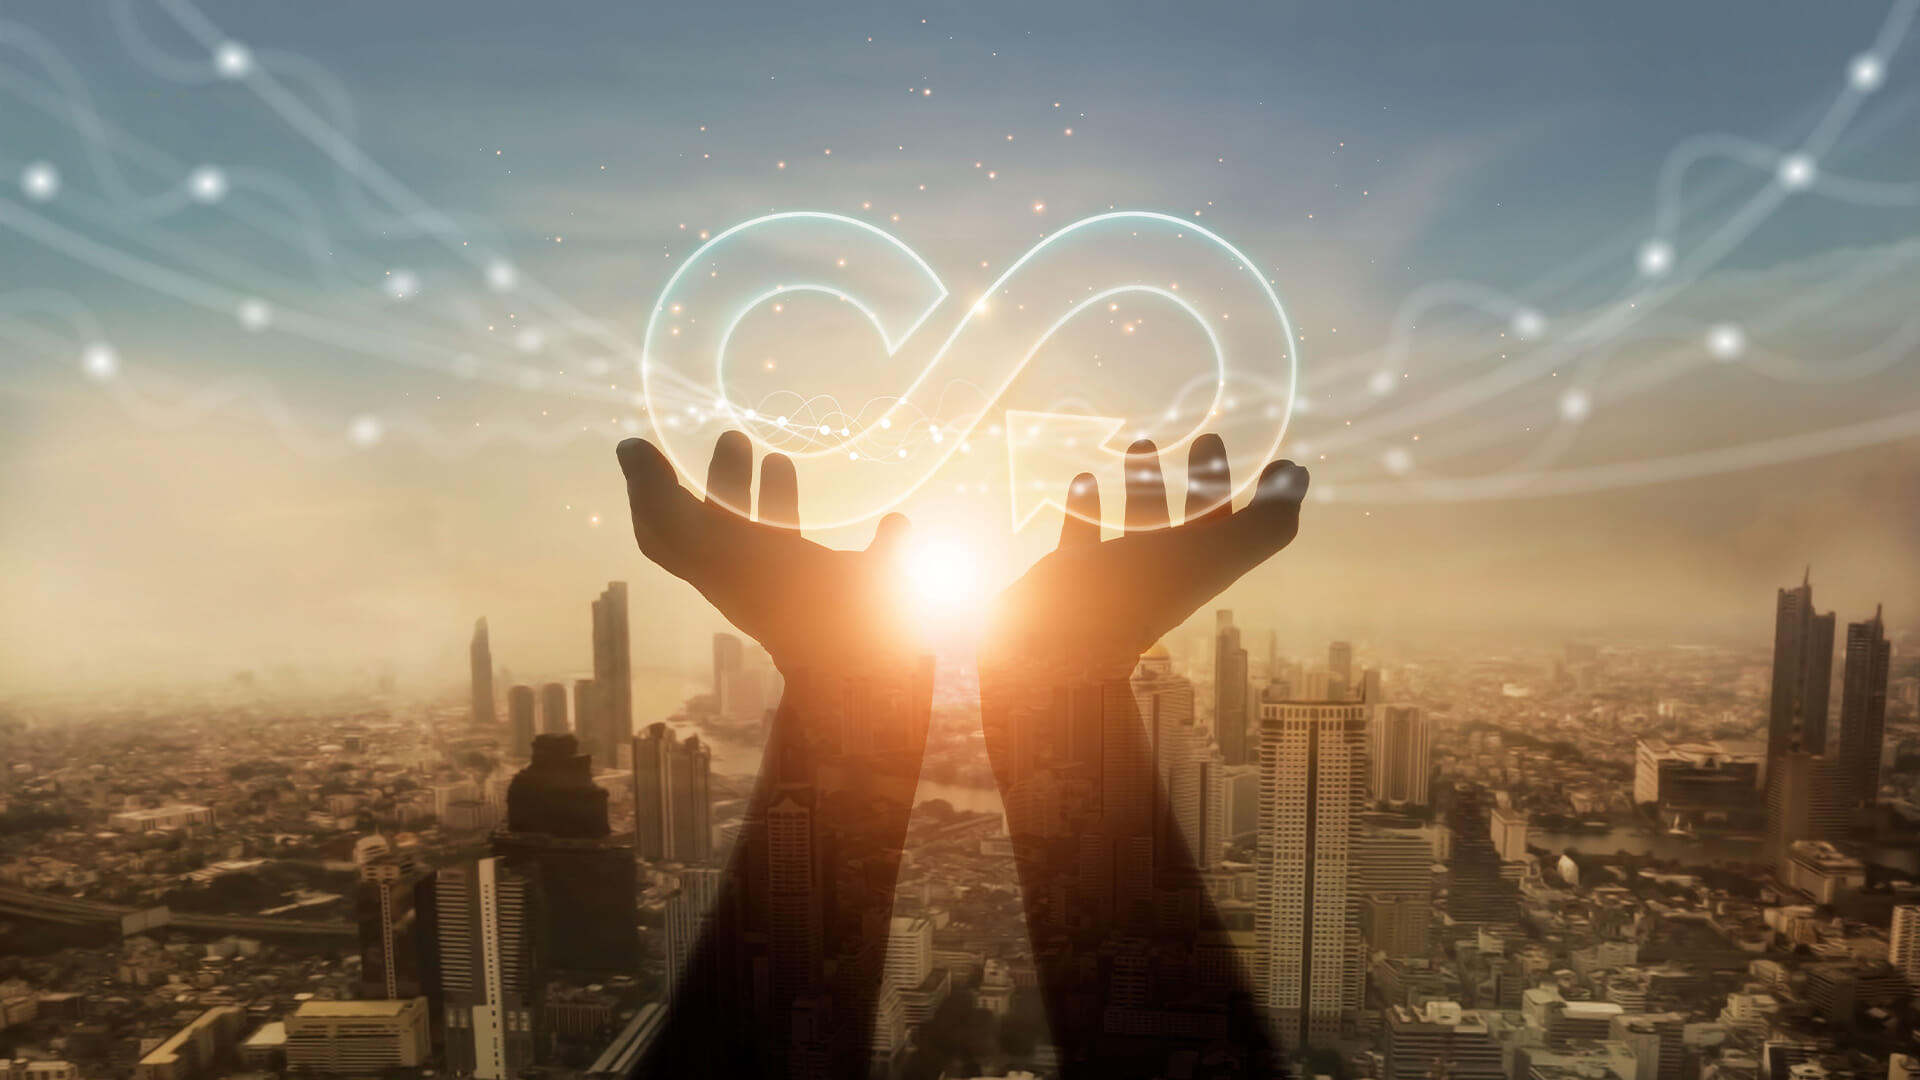 Hands holding an infinity symbol over a city skyline at sunset